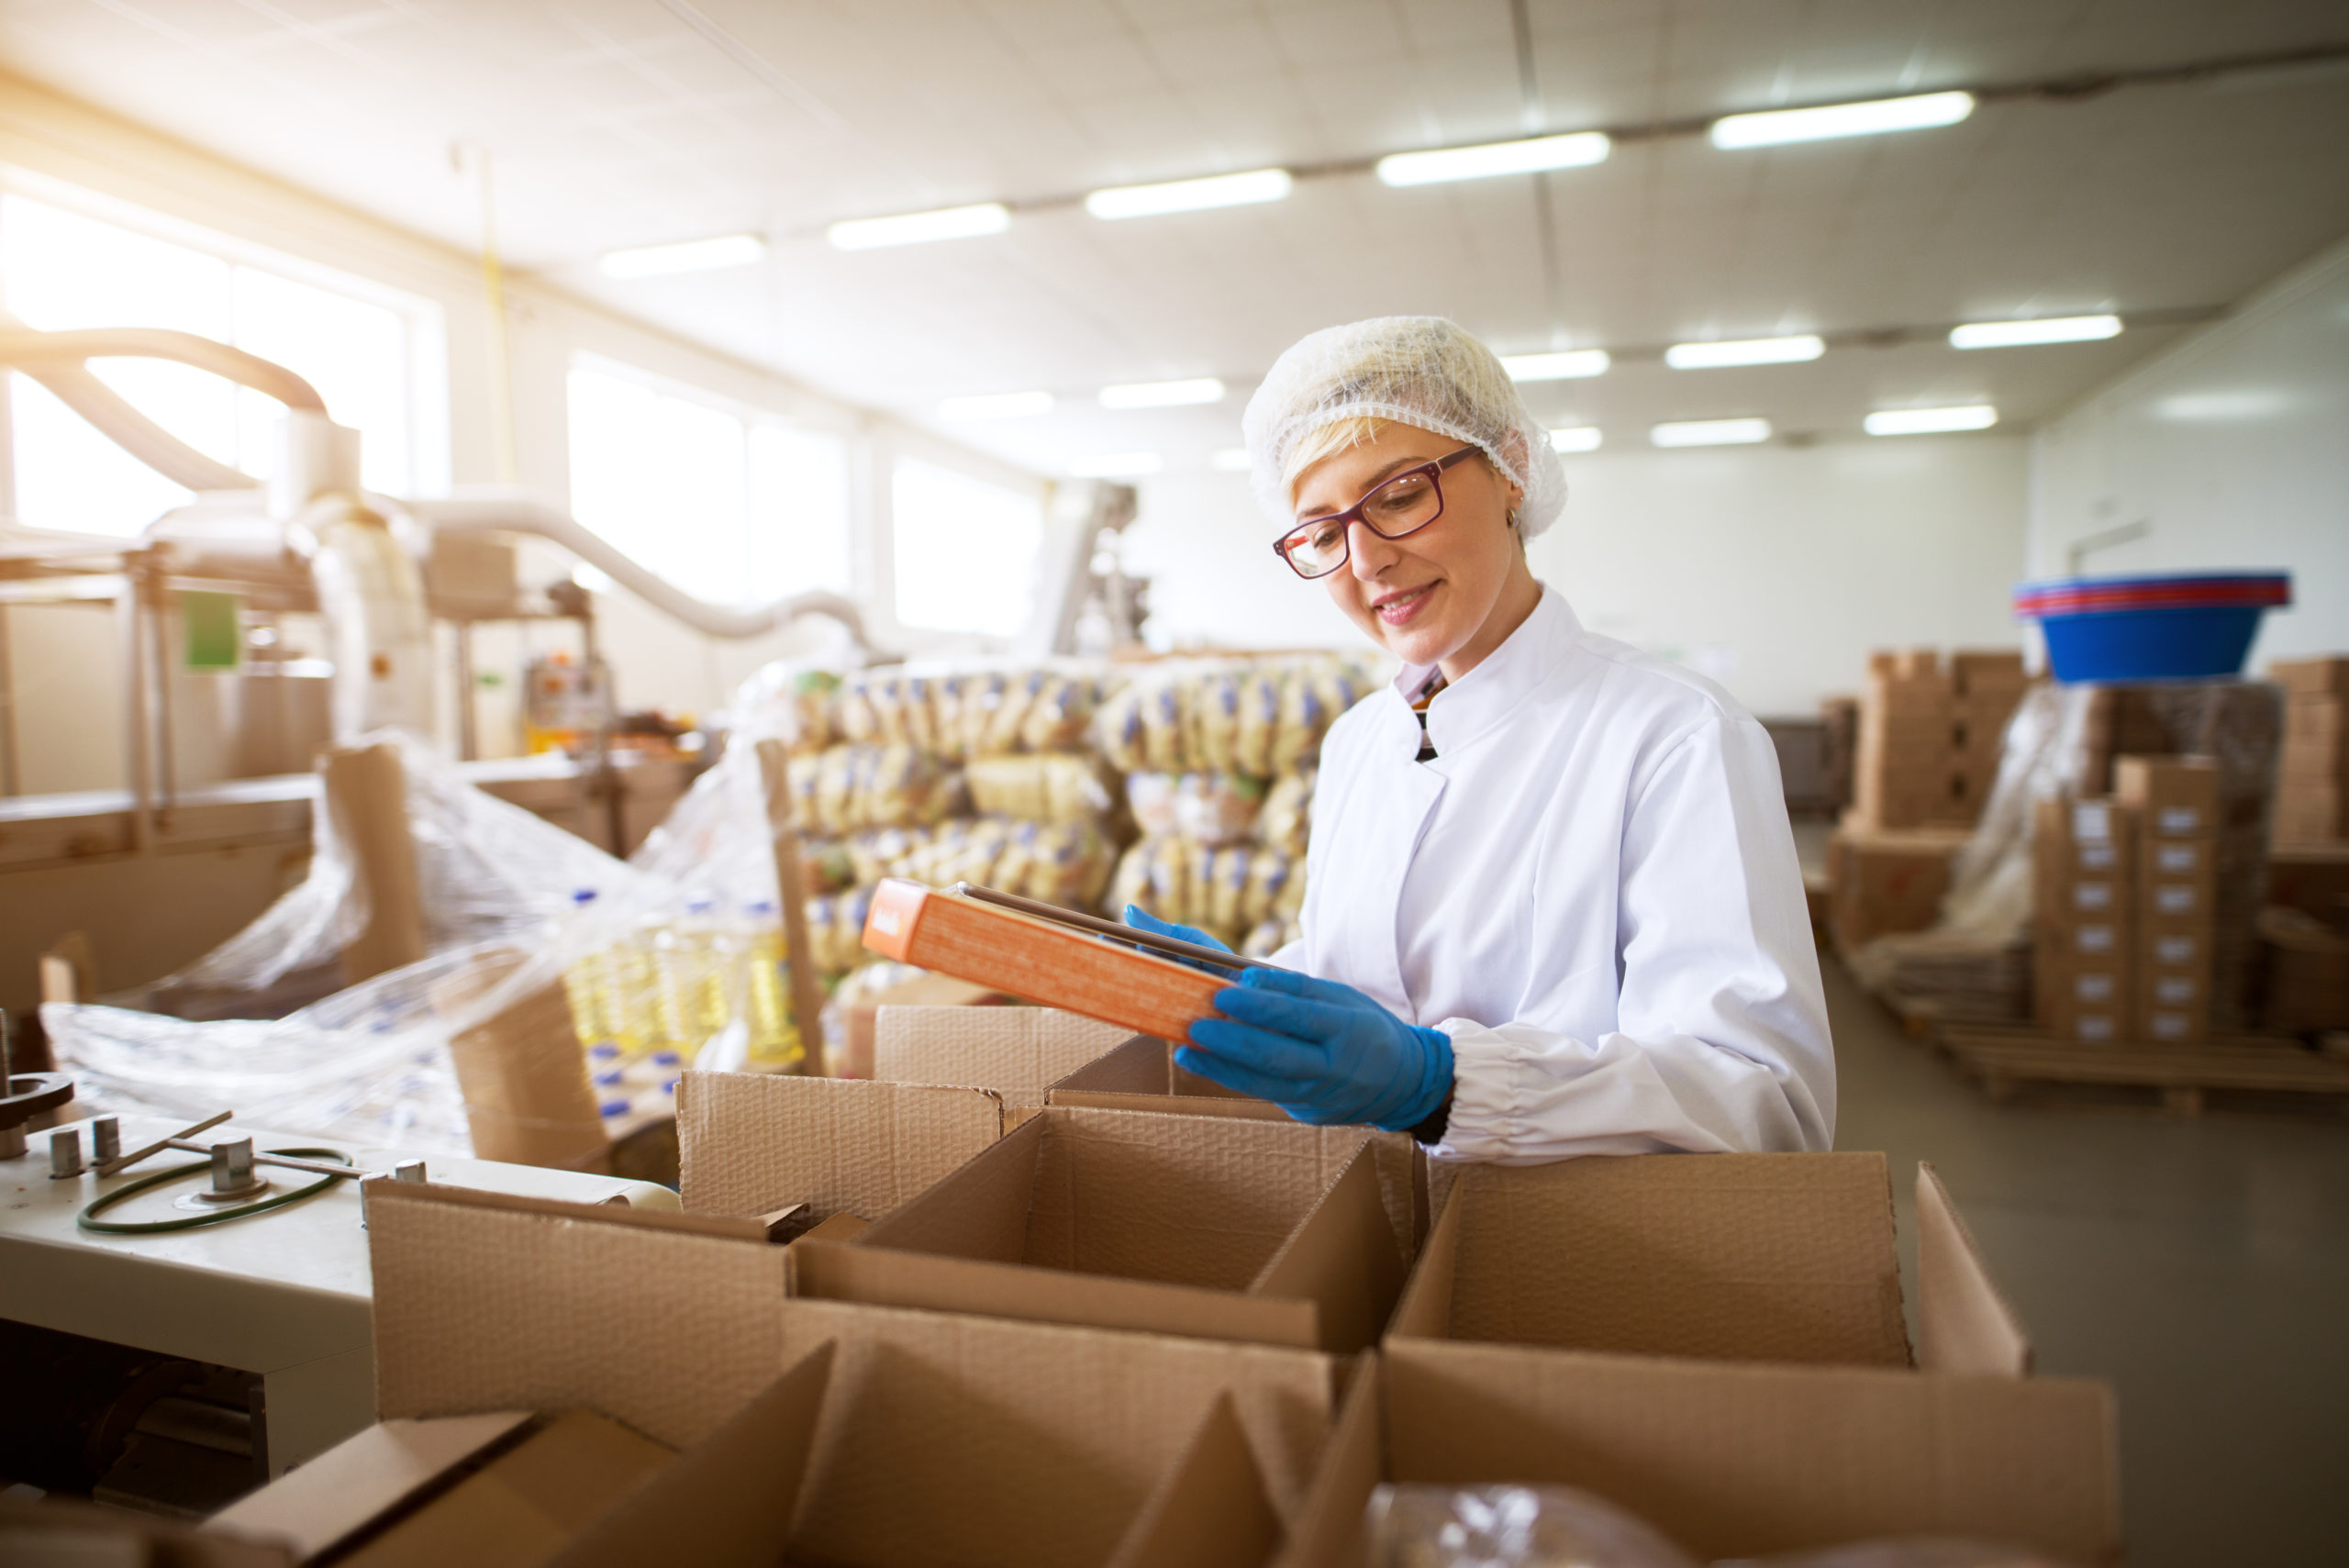 Worker packing food products